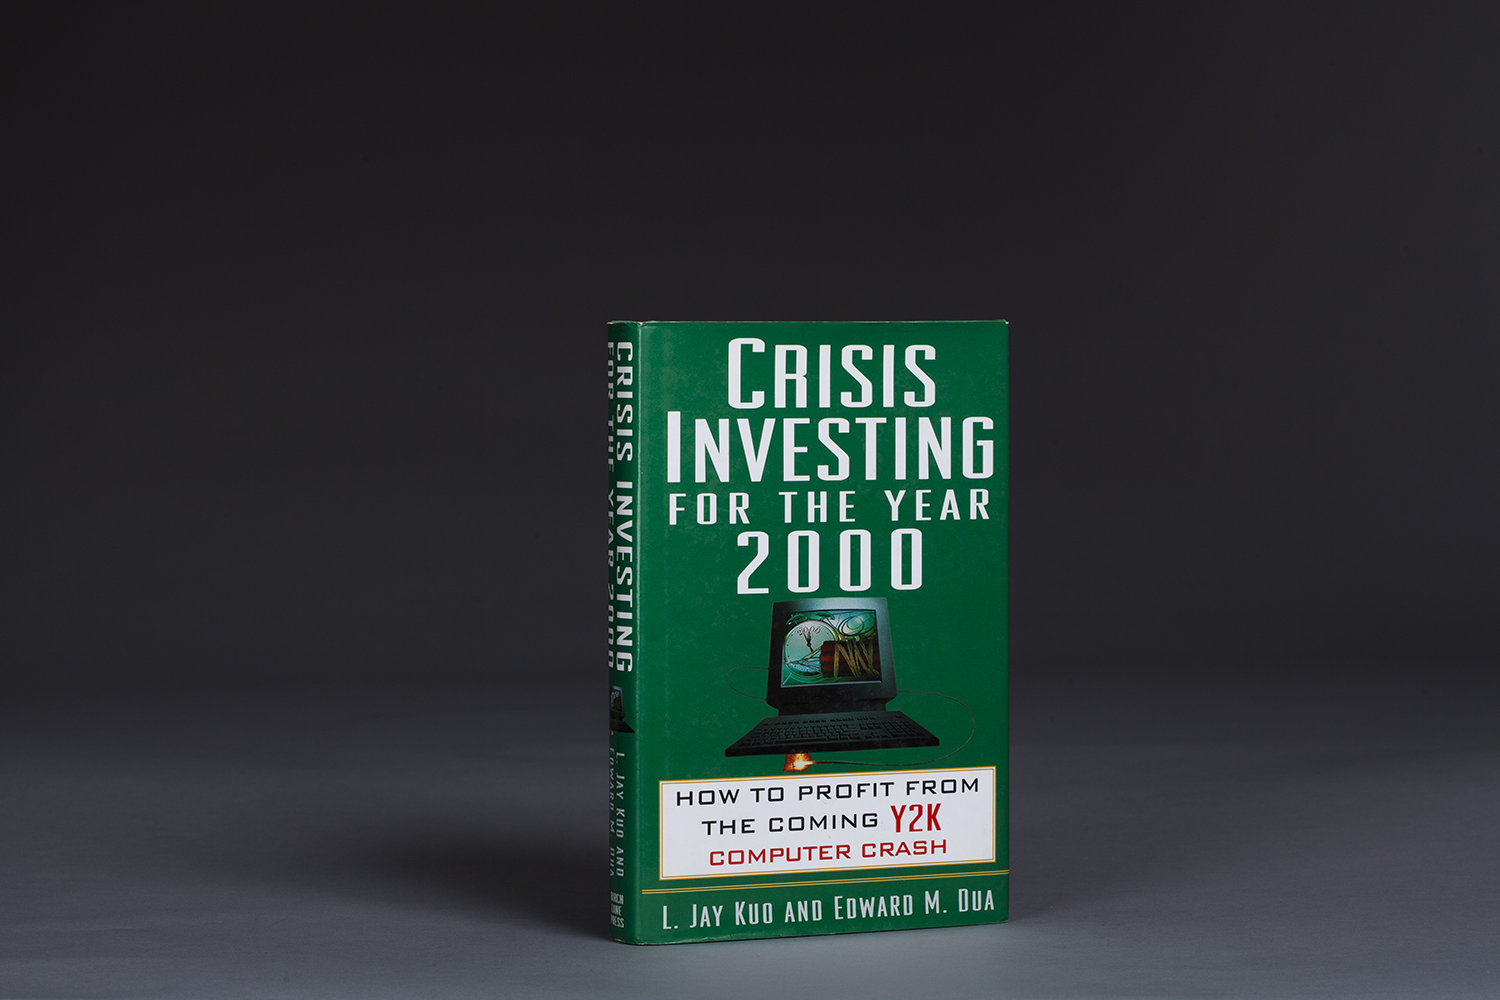 Crisis Investing for the Year 2000 - 0090 Cover.jpg